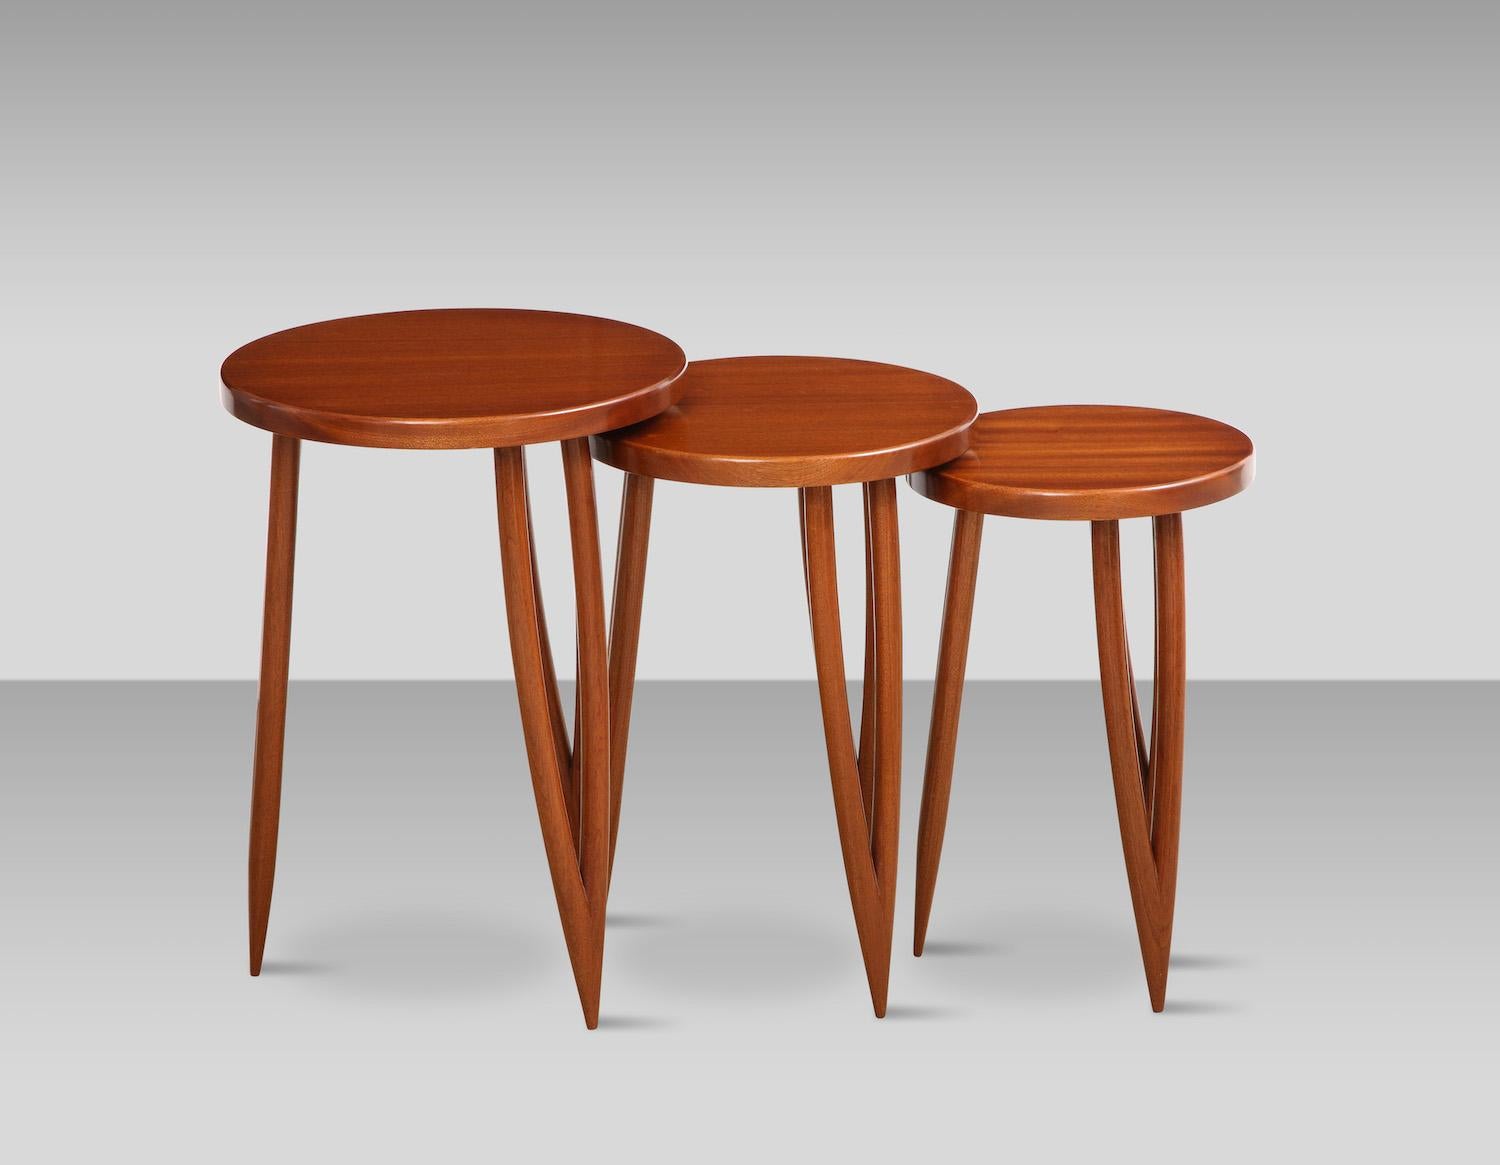 Set of 3 mahogany tables. Each with 3 hairpin legs. Made in Italy and very customizable.
Table 1: height 22”, diameter 16”
Table 2: height 20”, diameter 14”
Table 3: height 18.5”, diameter 12”.